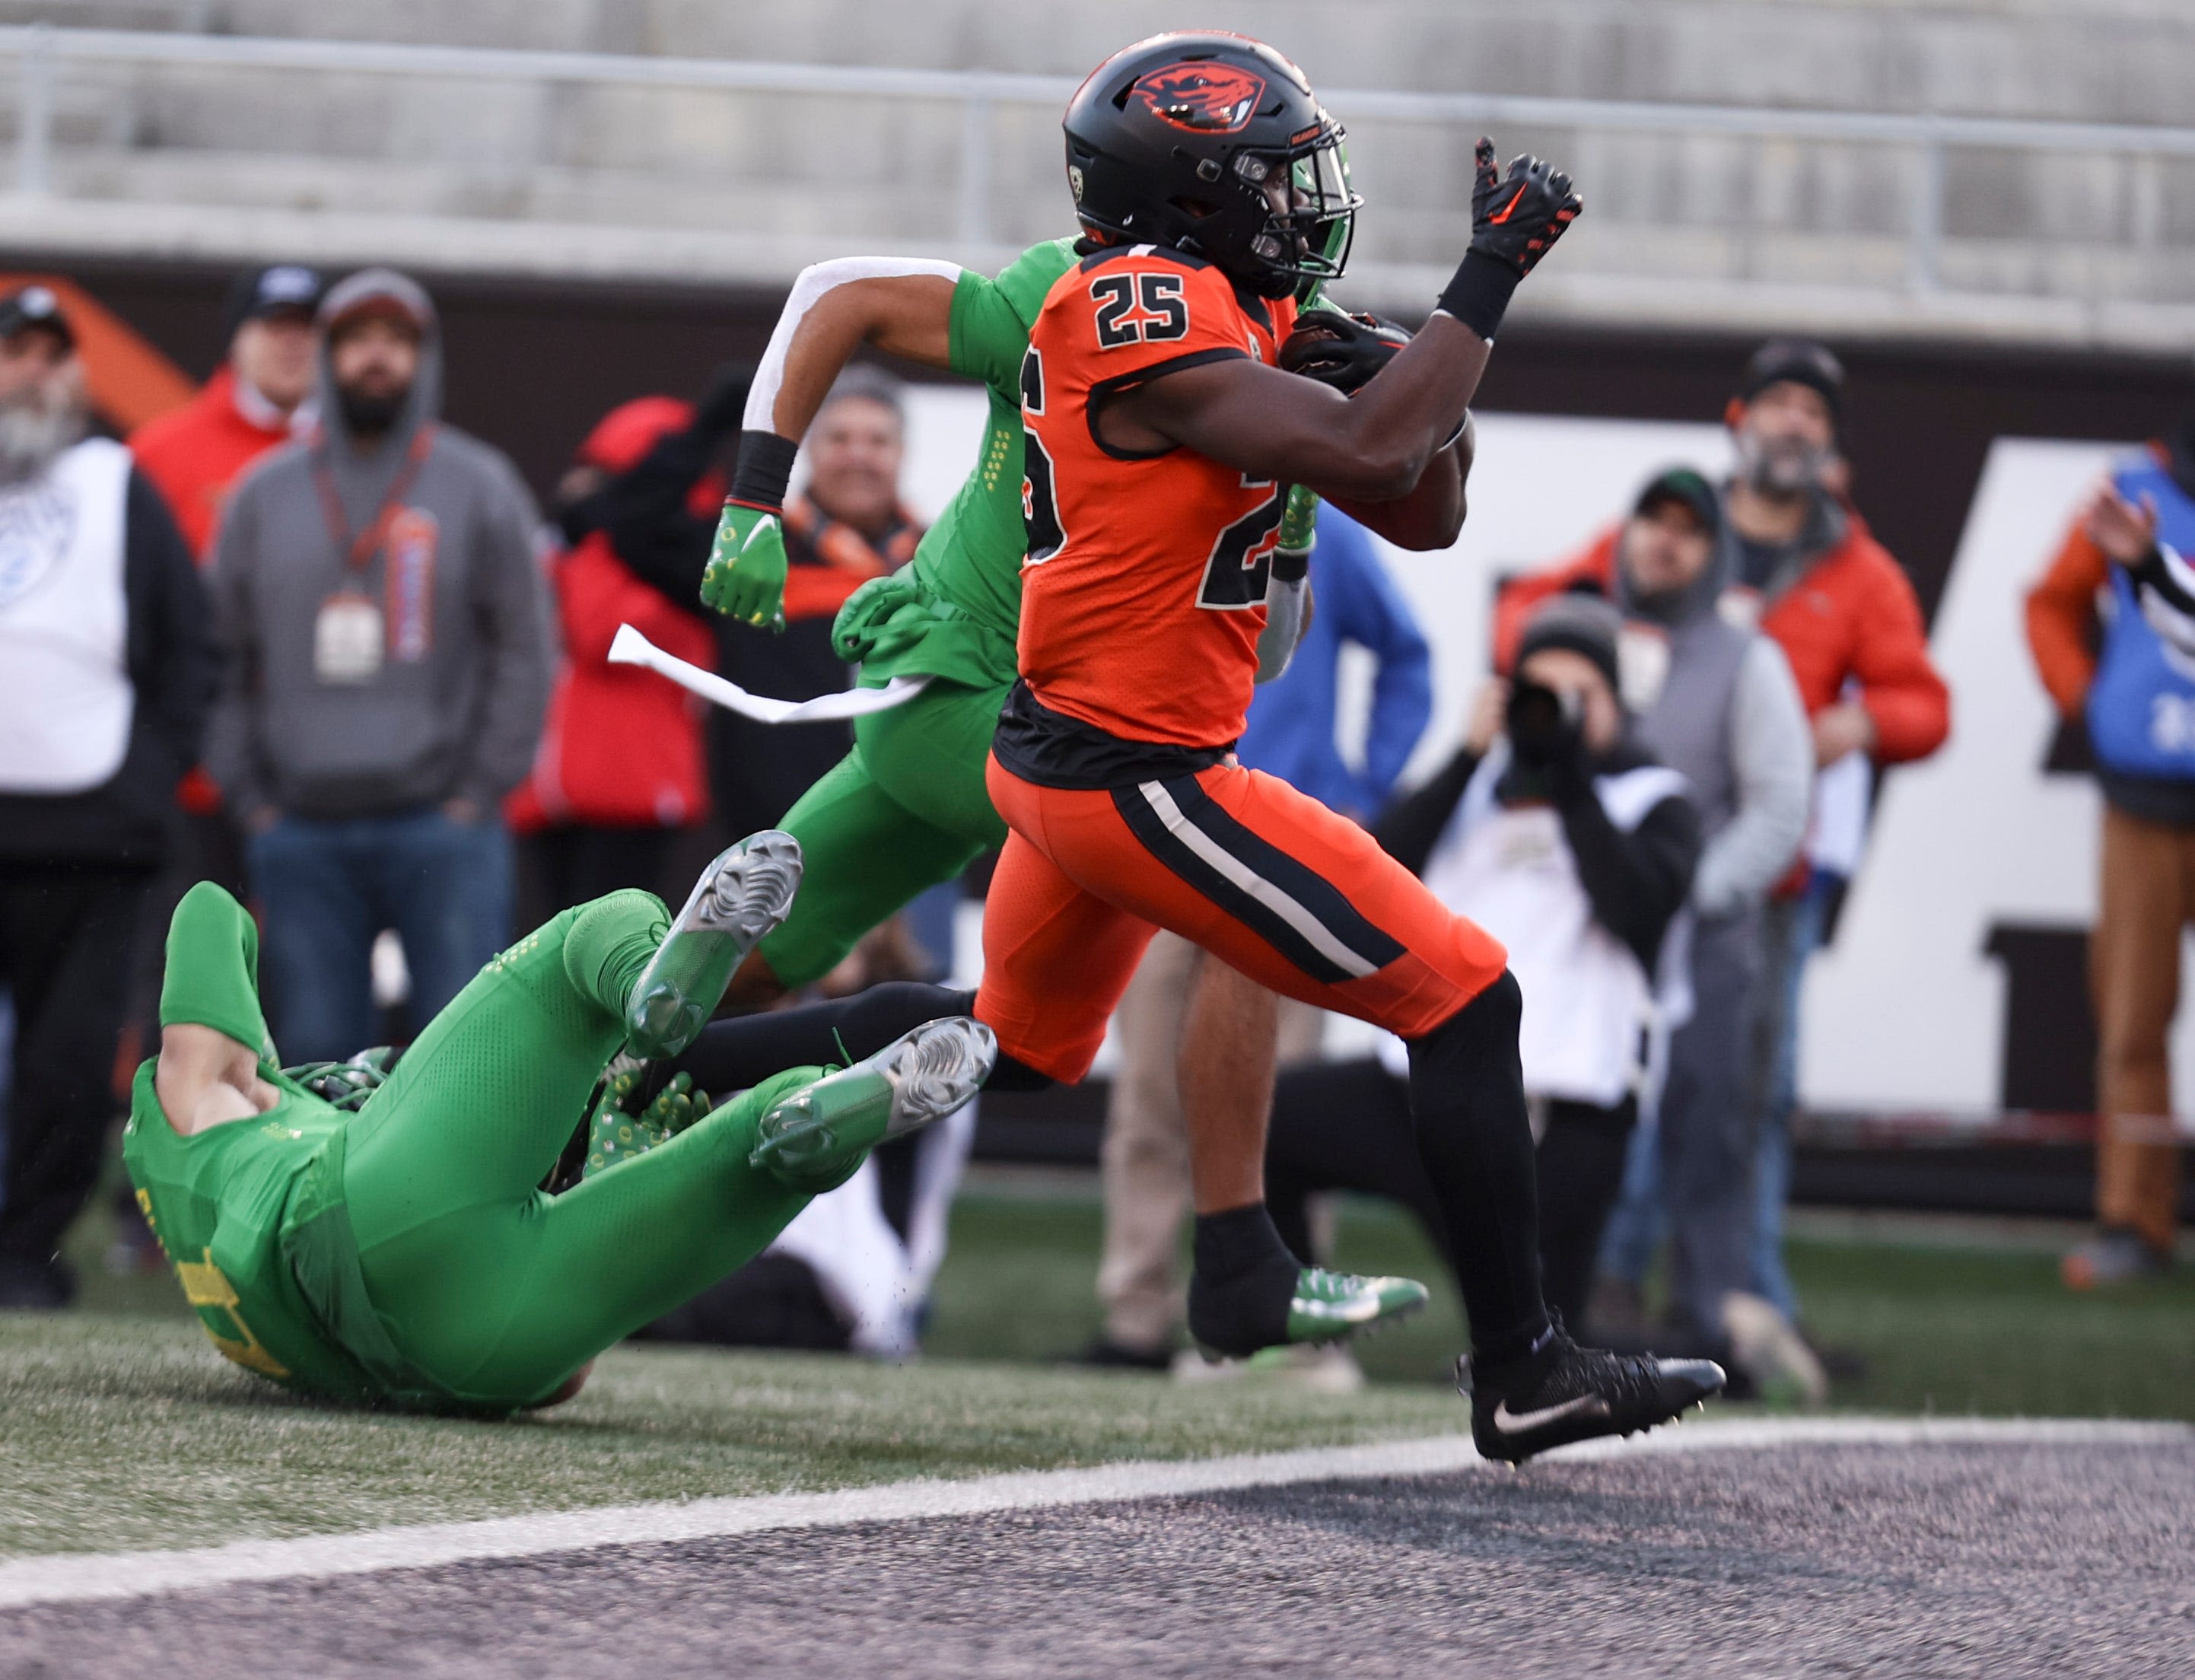 How many Oregon State football players entered the transfer portal this spring?